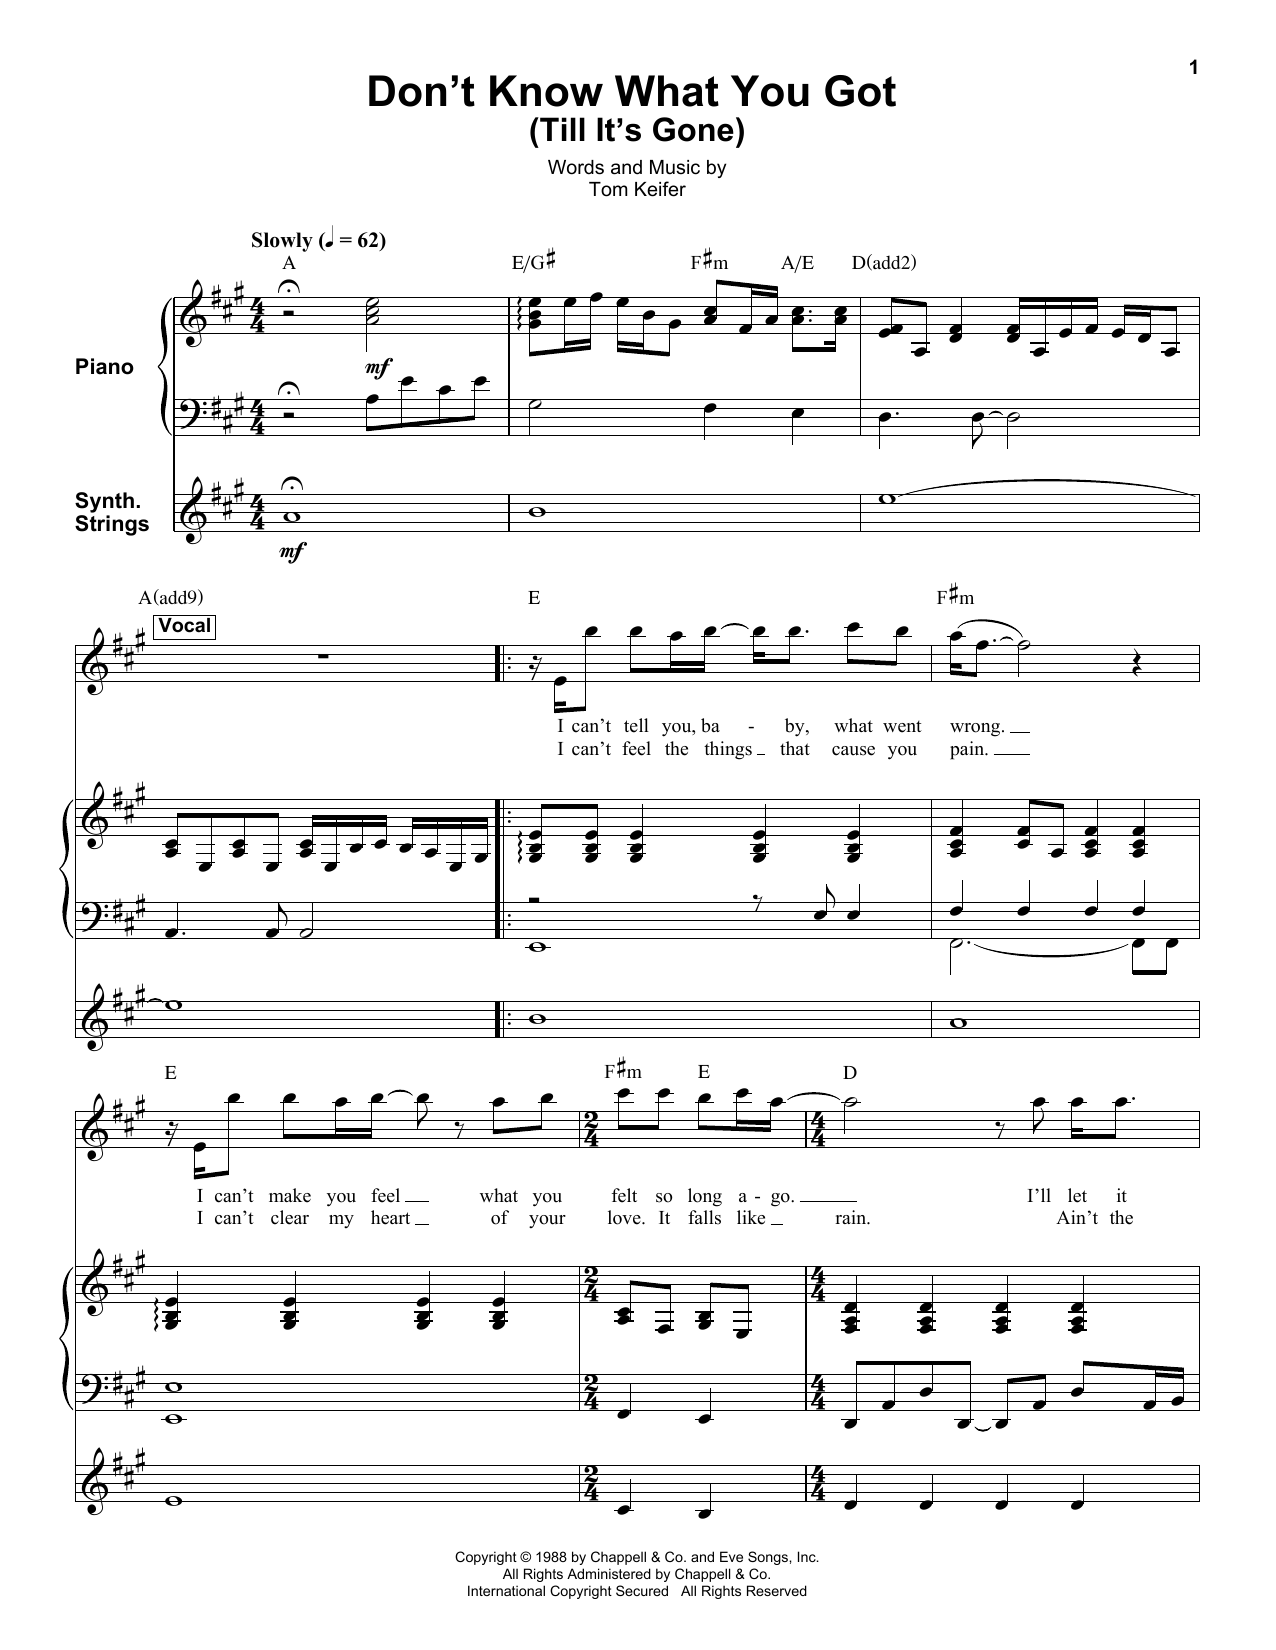 Download Cinderella Don't Know What You Got (Till It's Gone Sheet Music